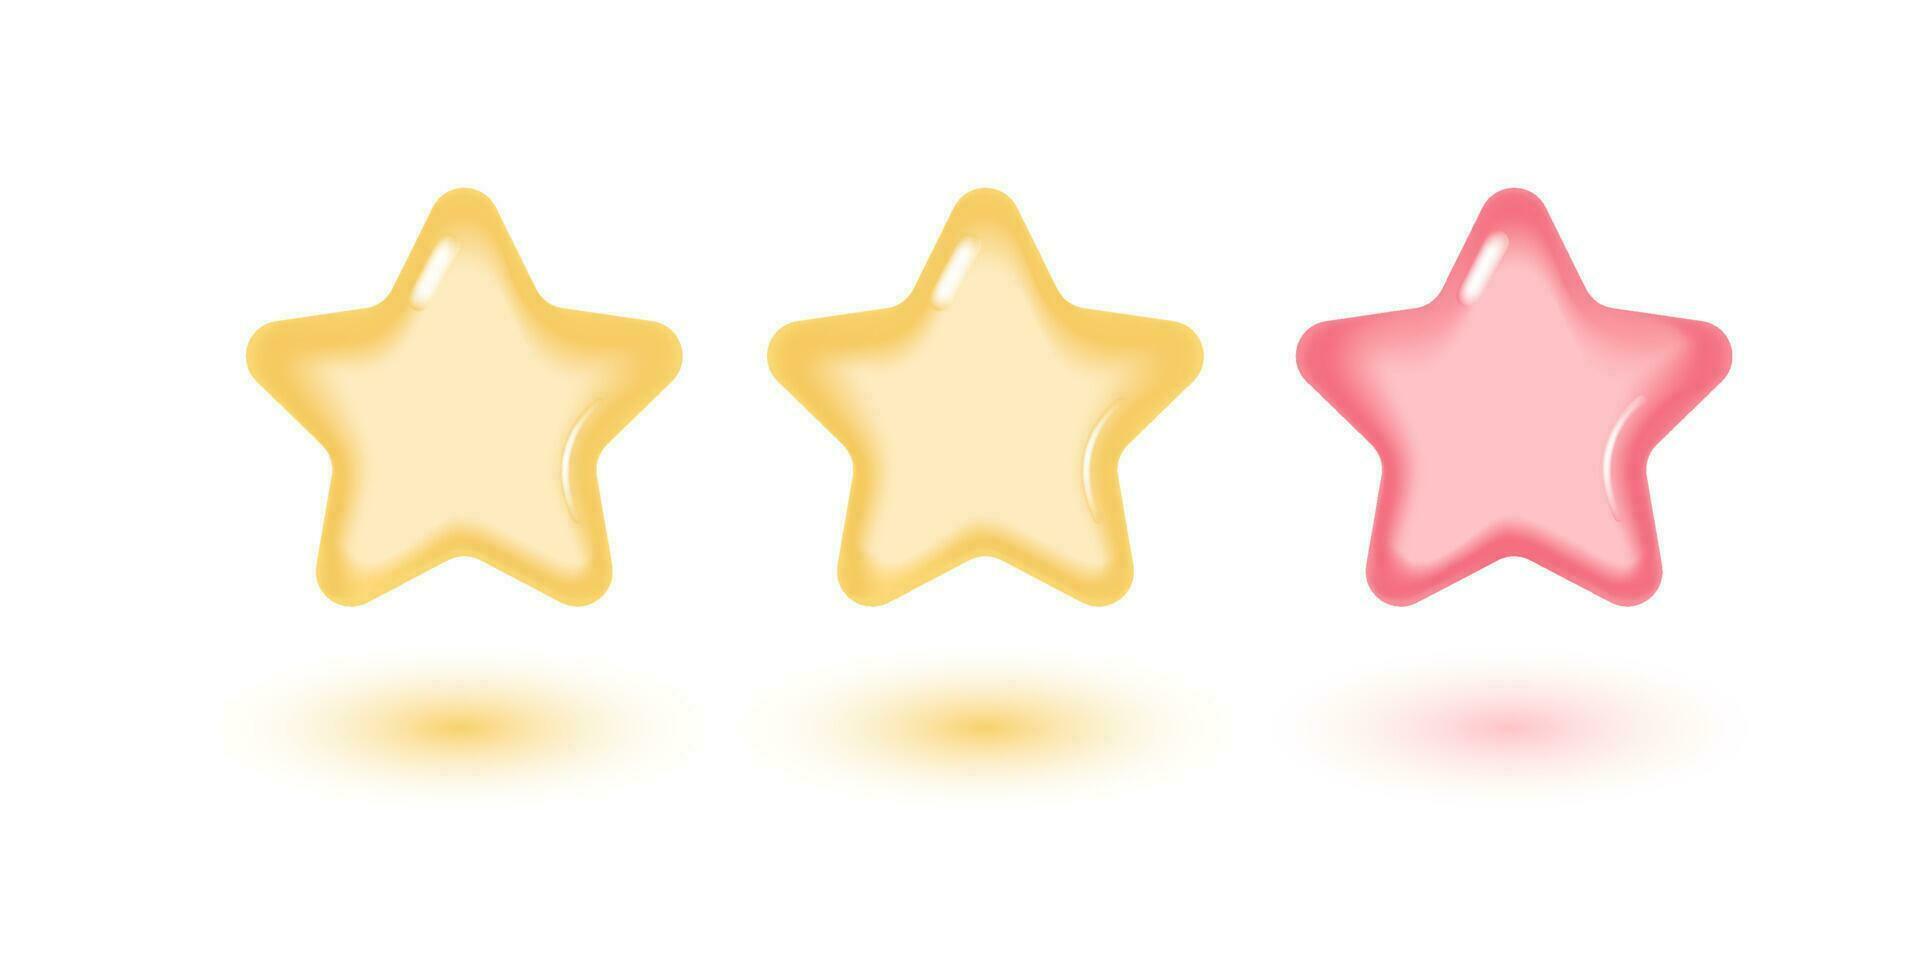 three stars, glossy yellow and pink colors. Customer rating feedback concept from the client about employee of website. Realistic 3d design of the object. For mobile applications. Vector illustration.